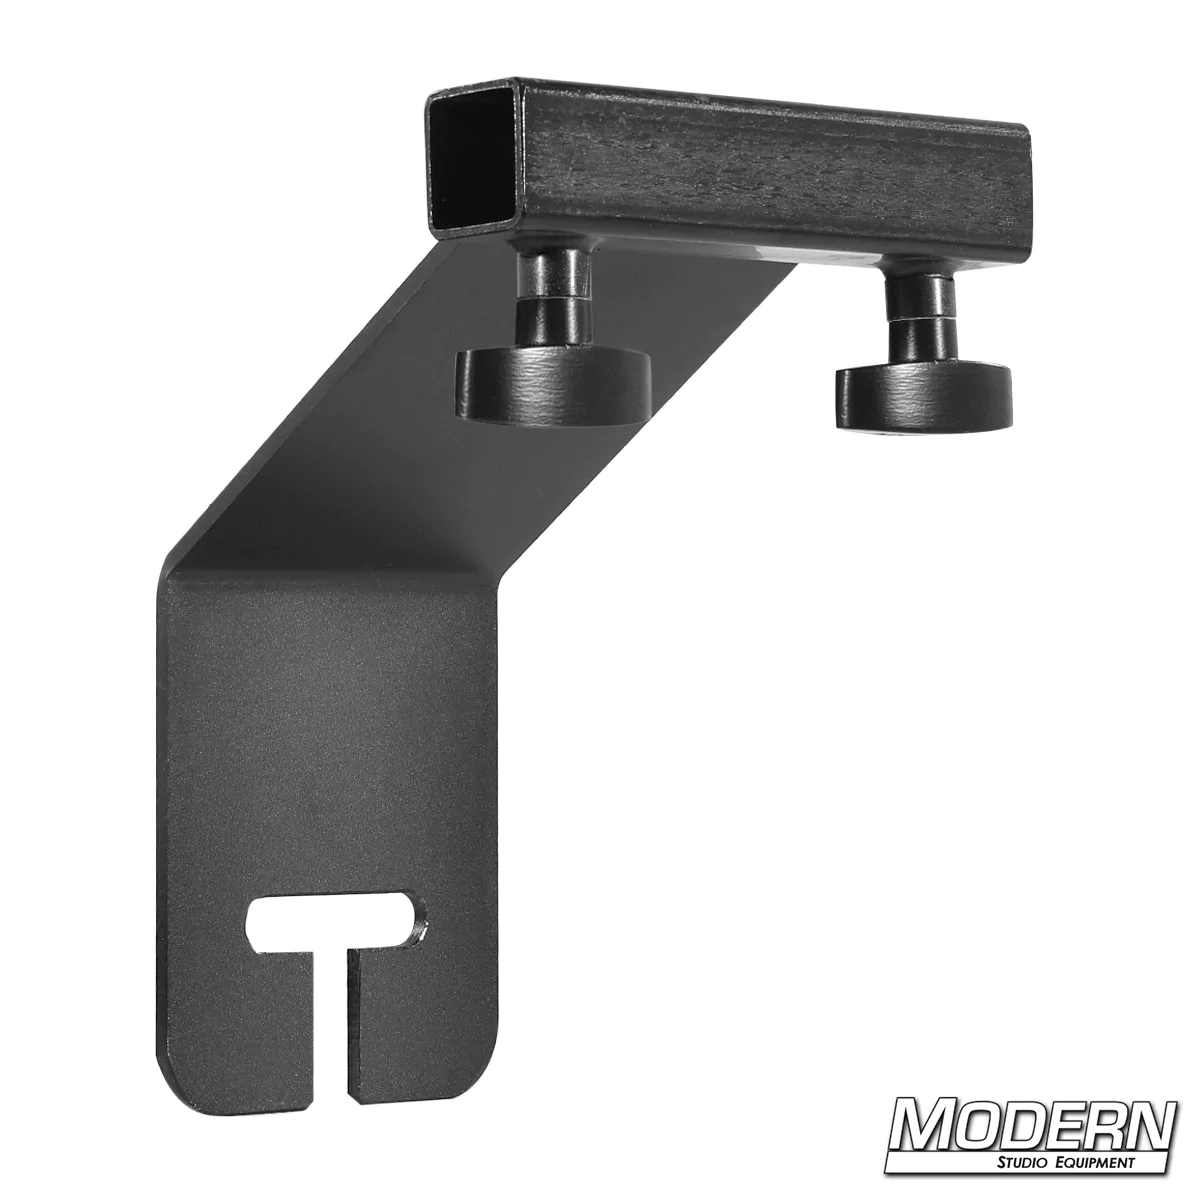 Offset Ear for 1-inch Square Tube - Black Zinc with T-Handles